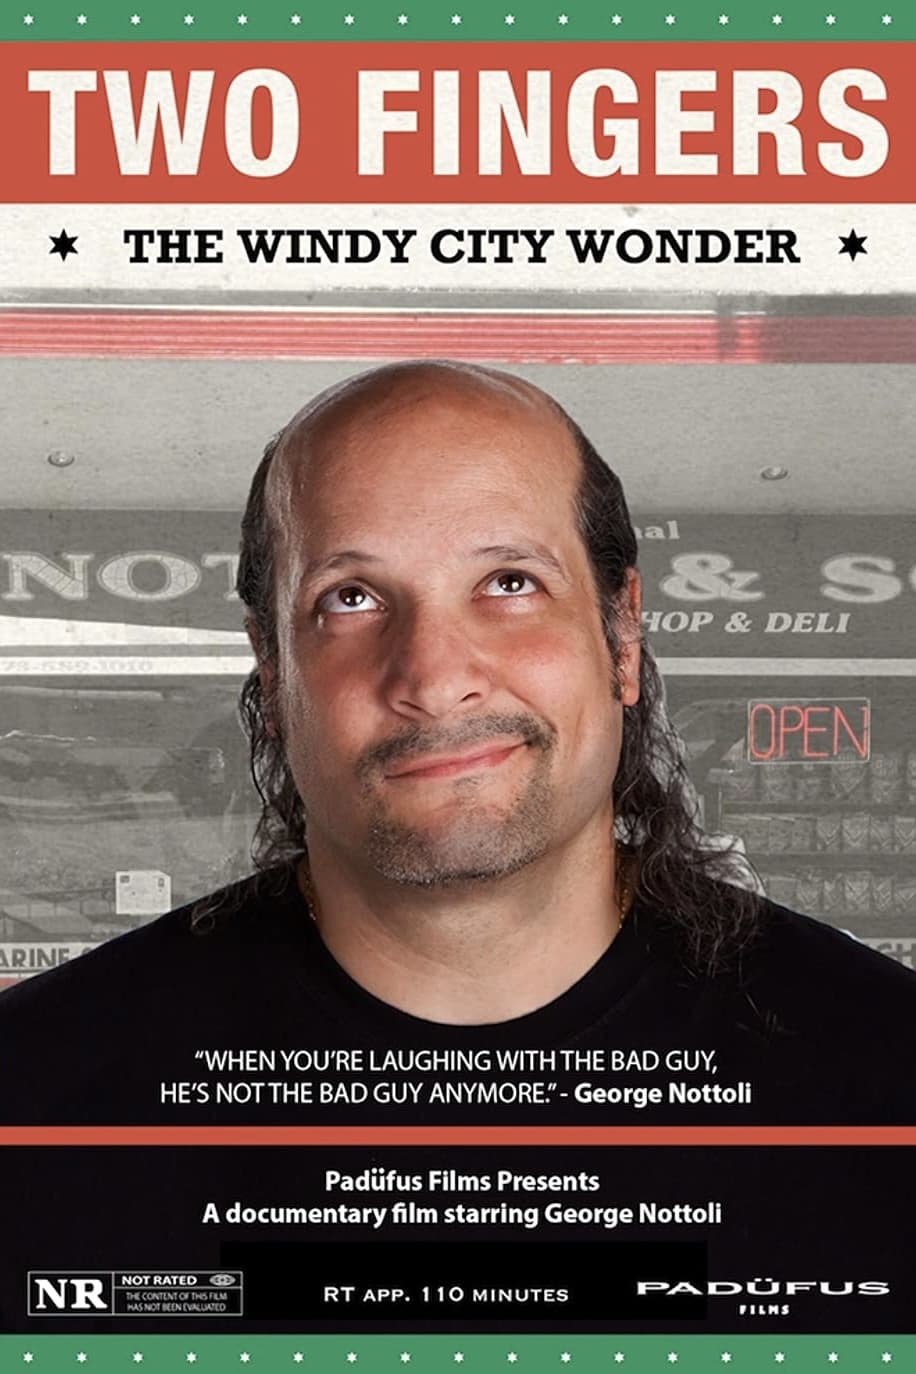 Two Fingers: The Windy City Wonder